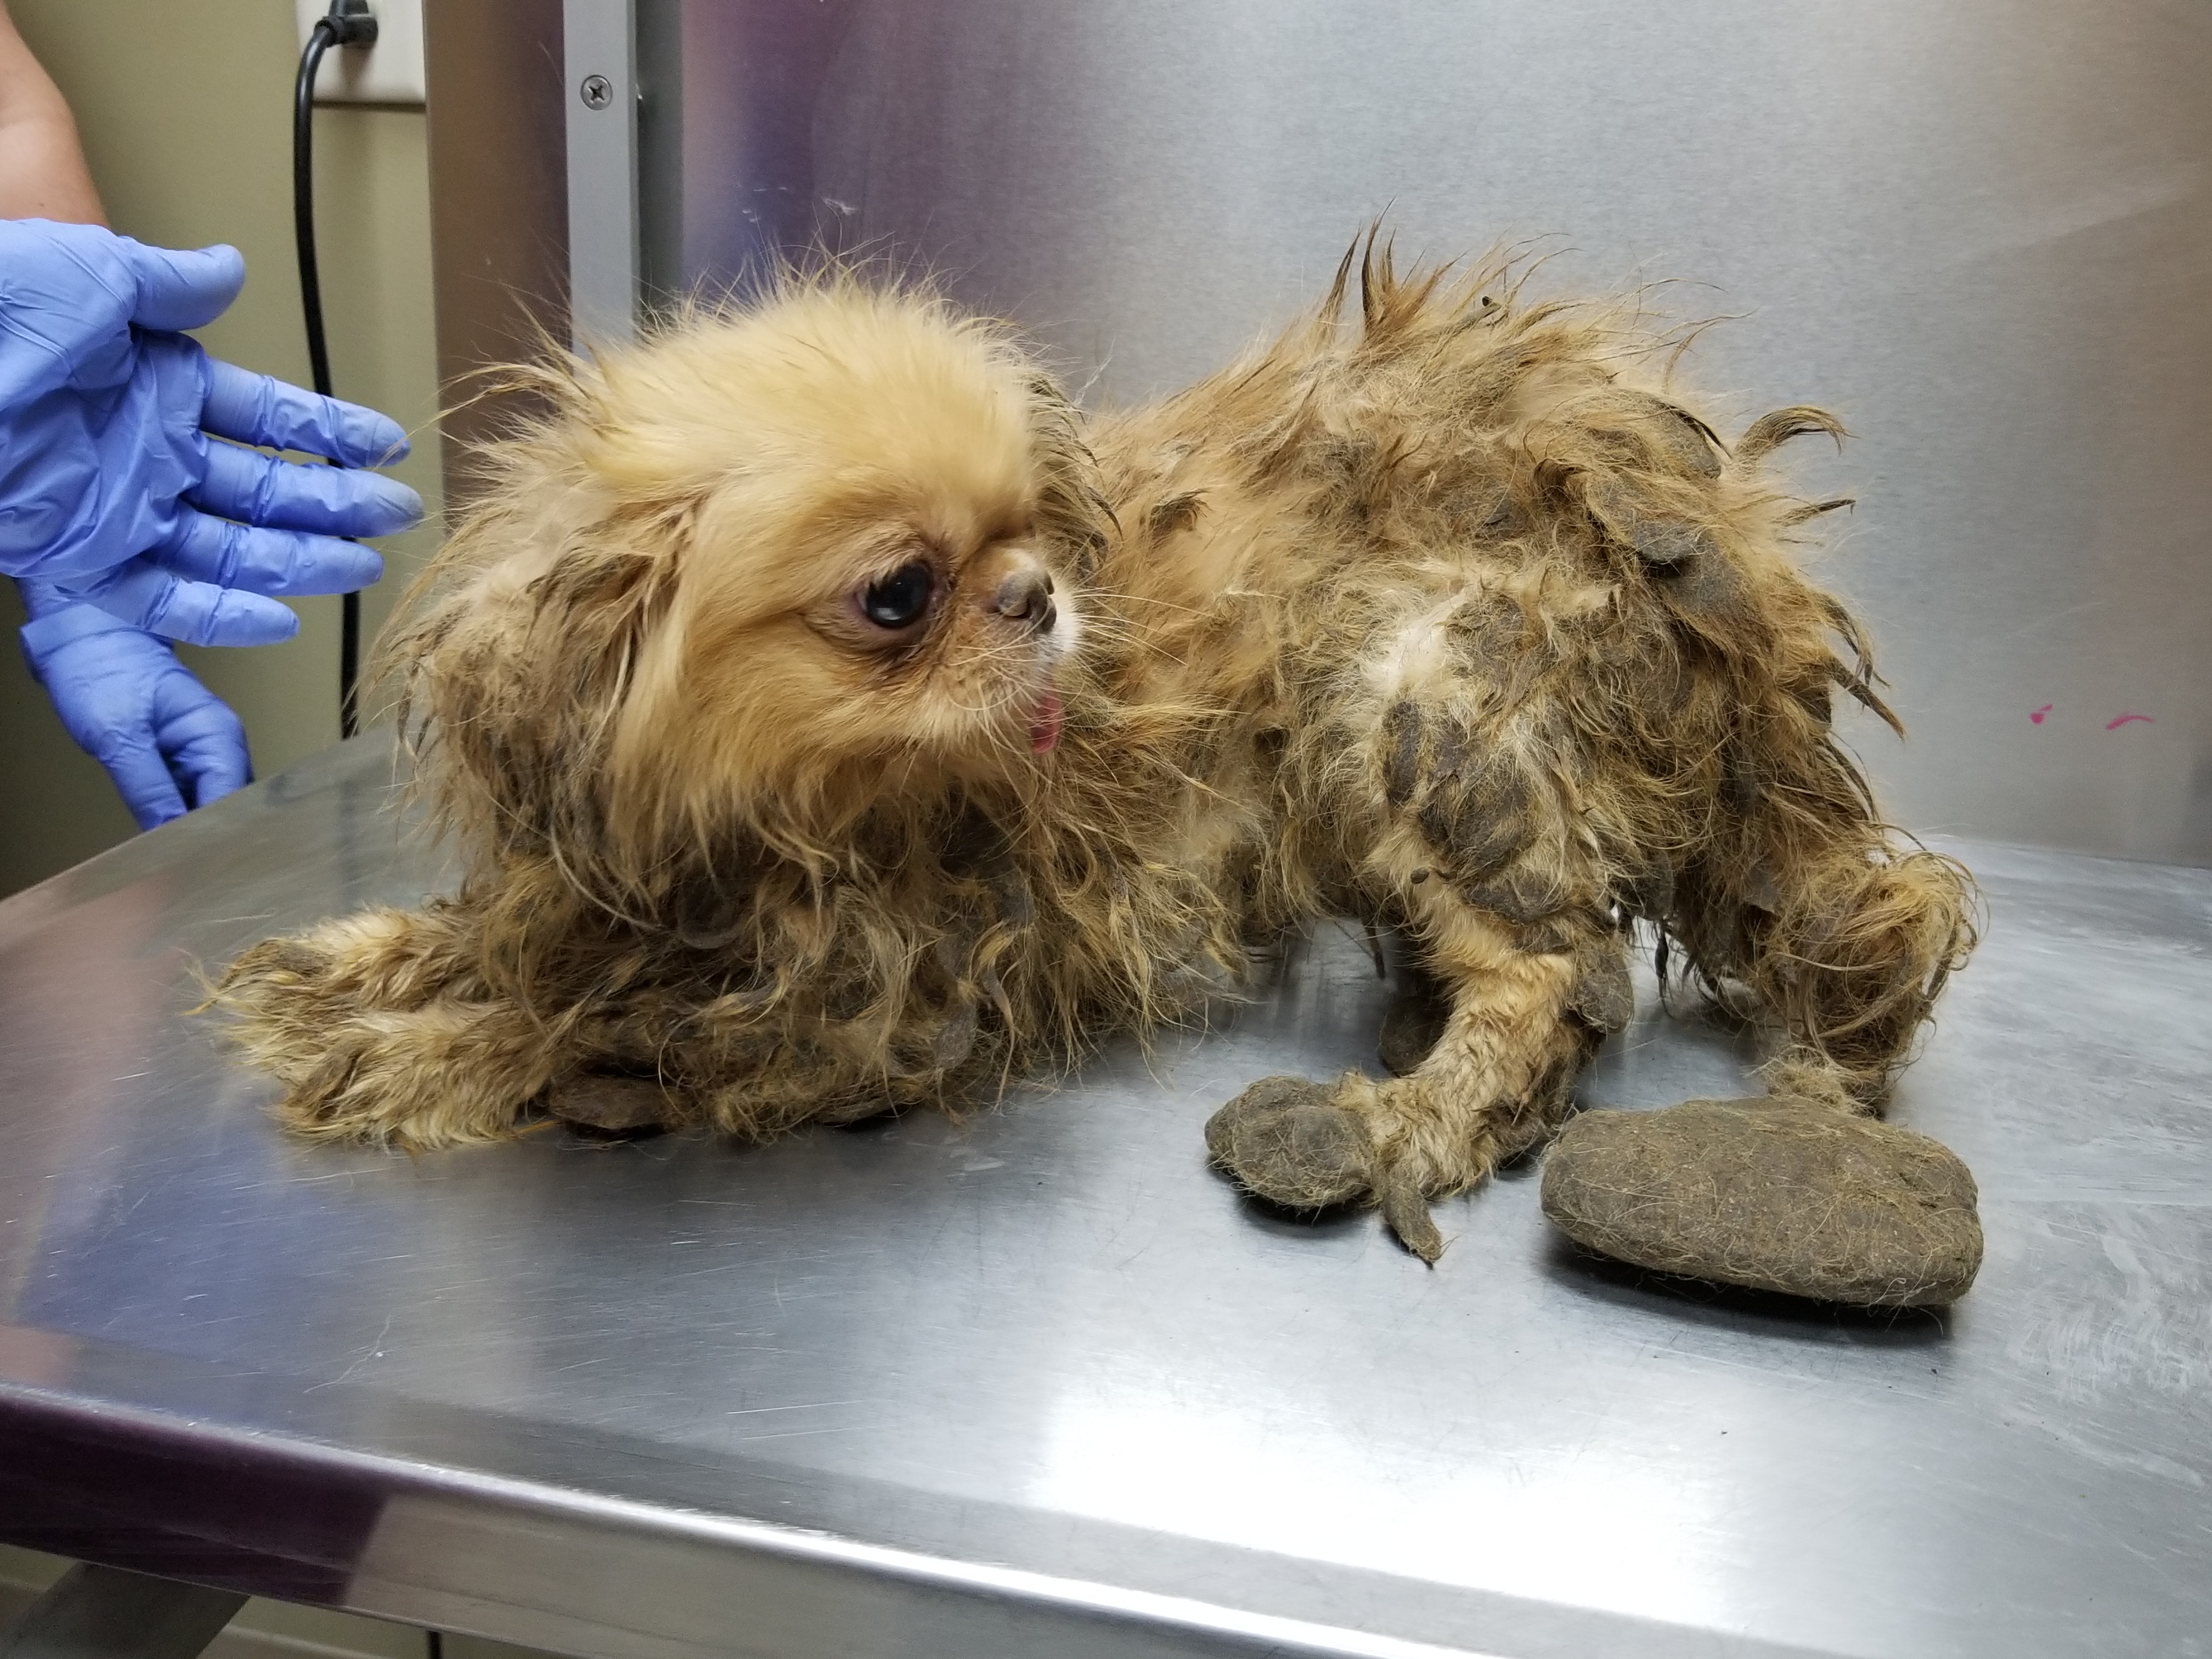 SPCA Over 40 Dead Dogs Found, 32 Other Animals Seized At Delaware